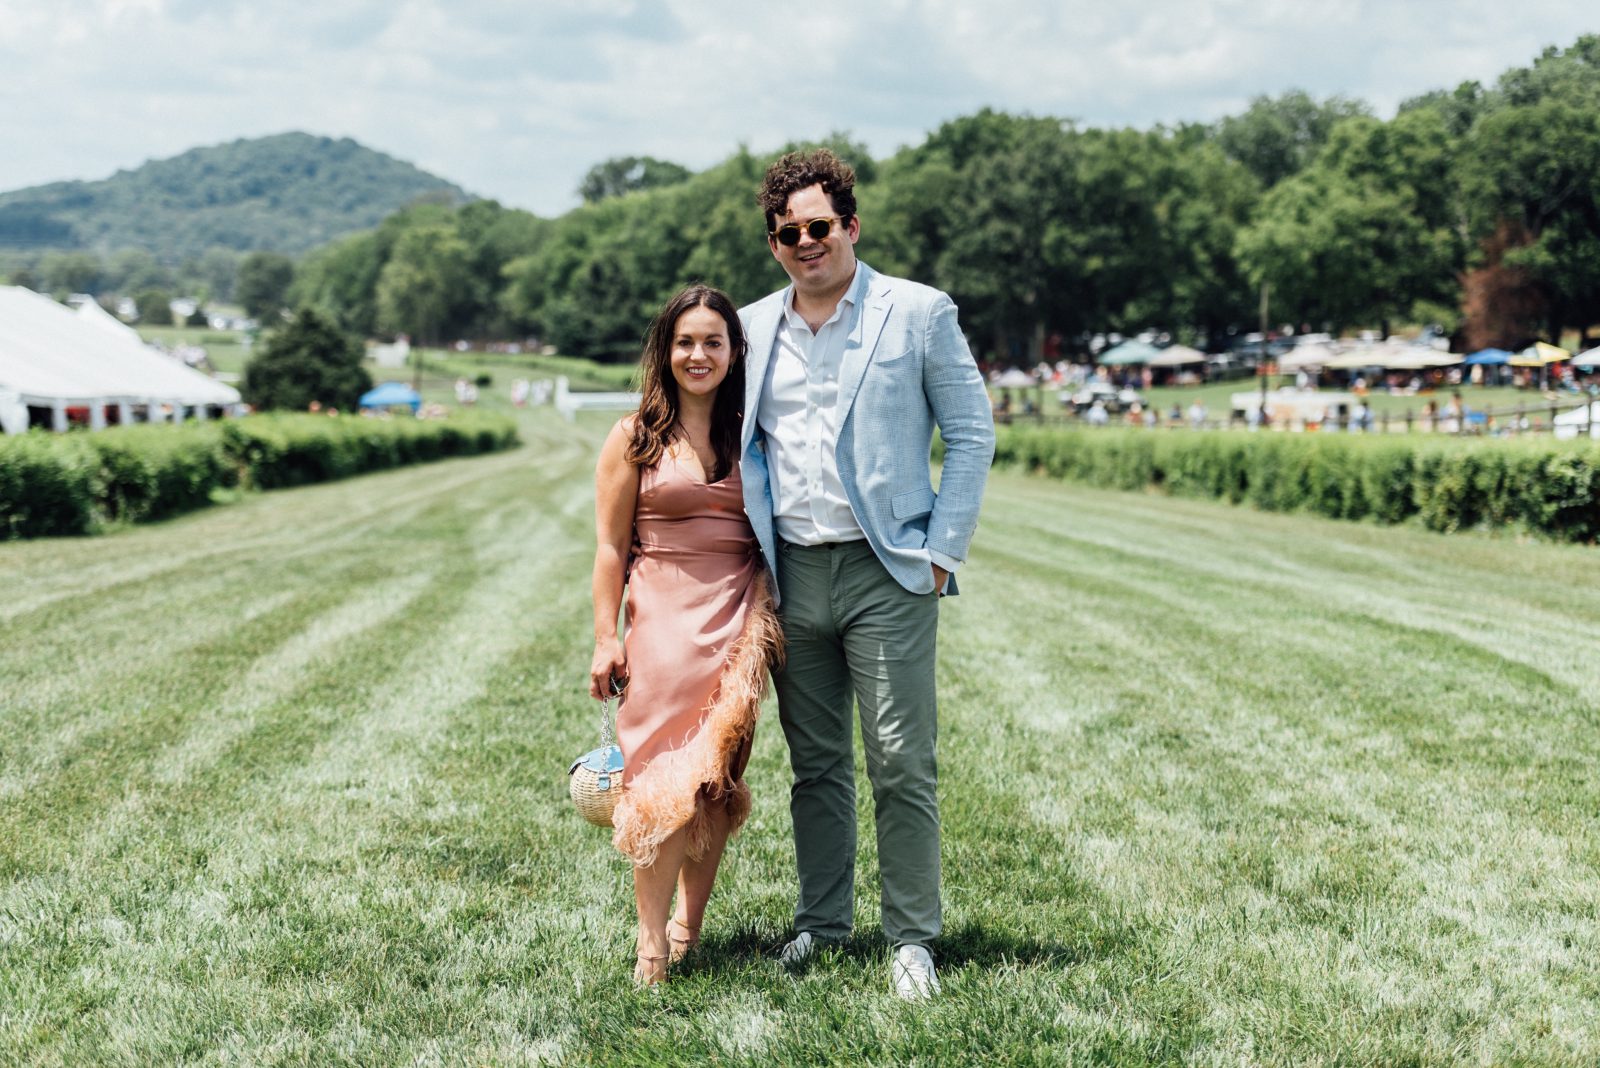 Alyssa and Chris Duffy at the Steeplechase Tennessee outdoor fashion show.